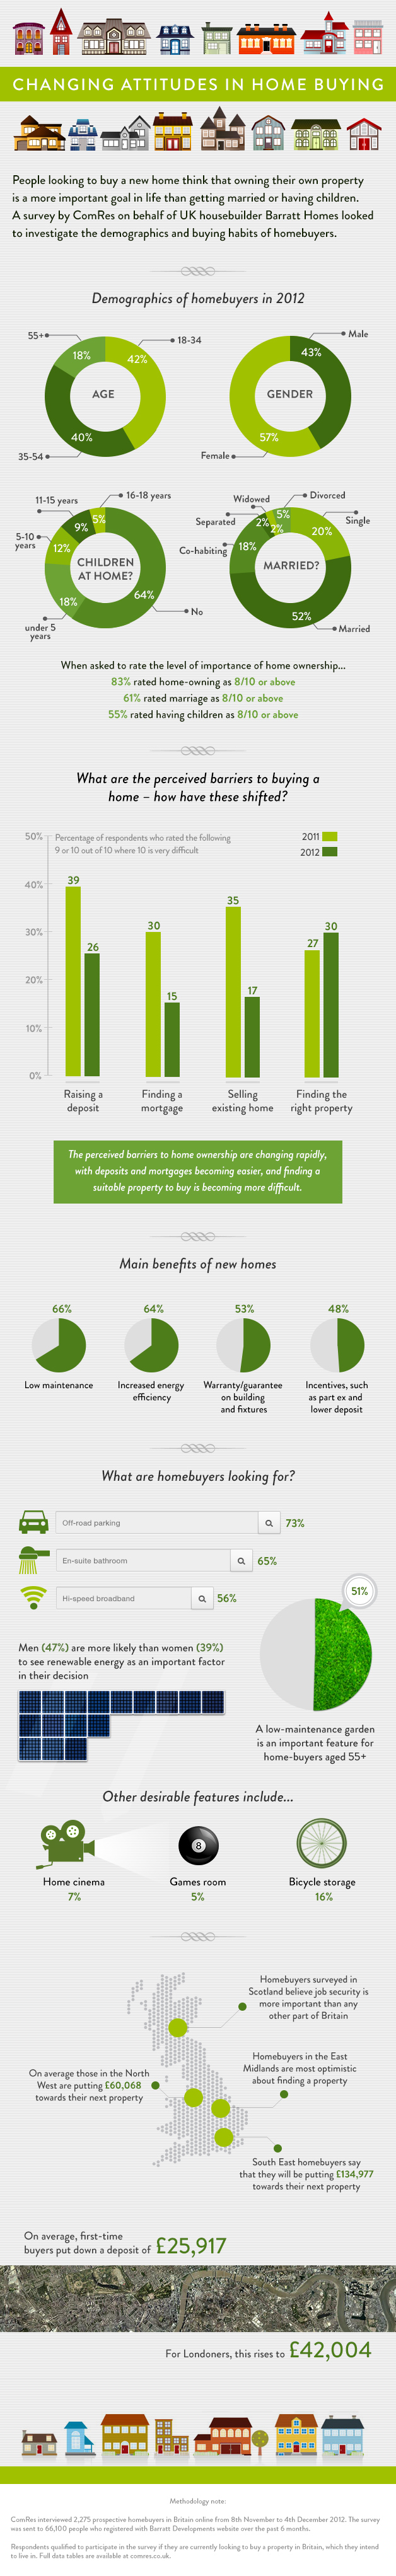 Barratt Homes - Changing Attitudes In Home Buying Infographic